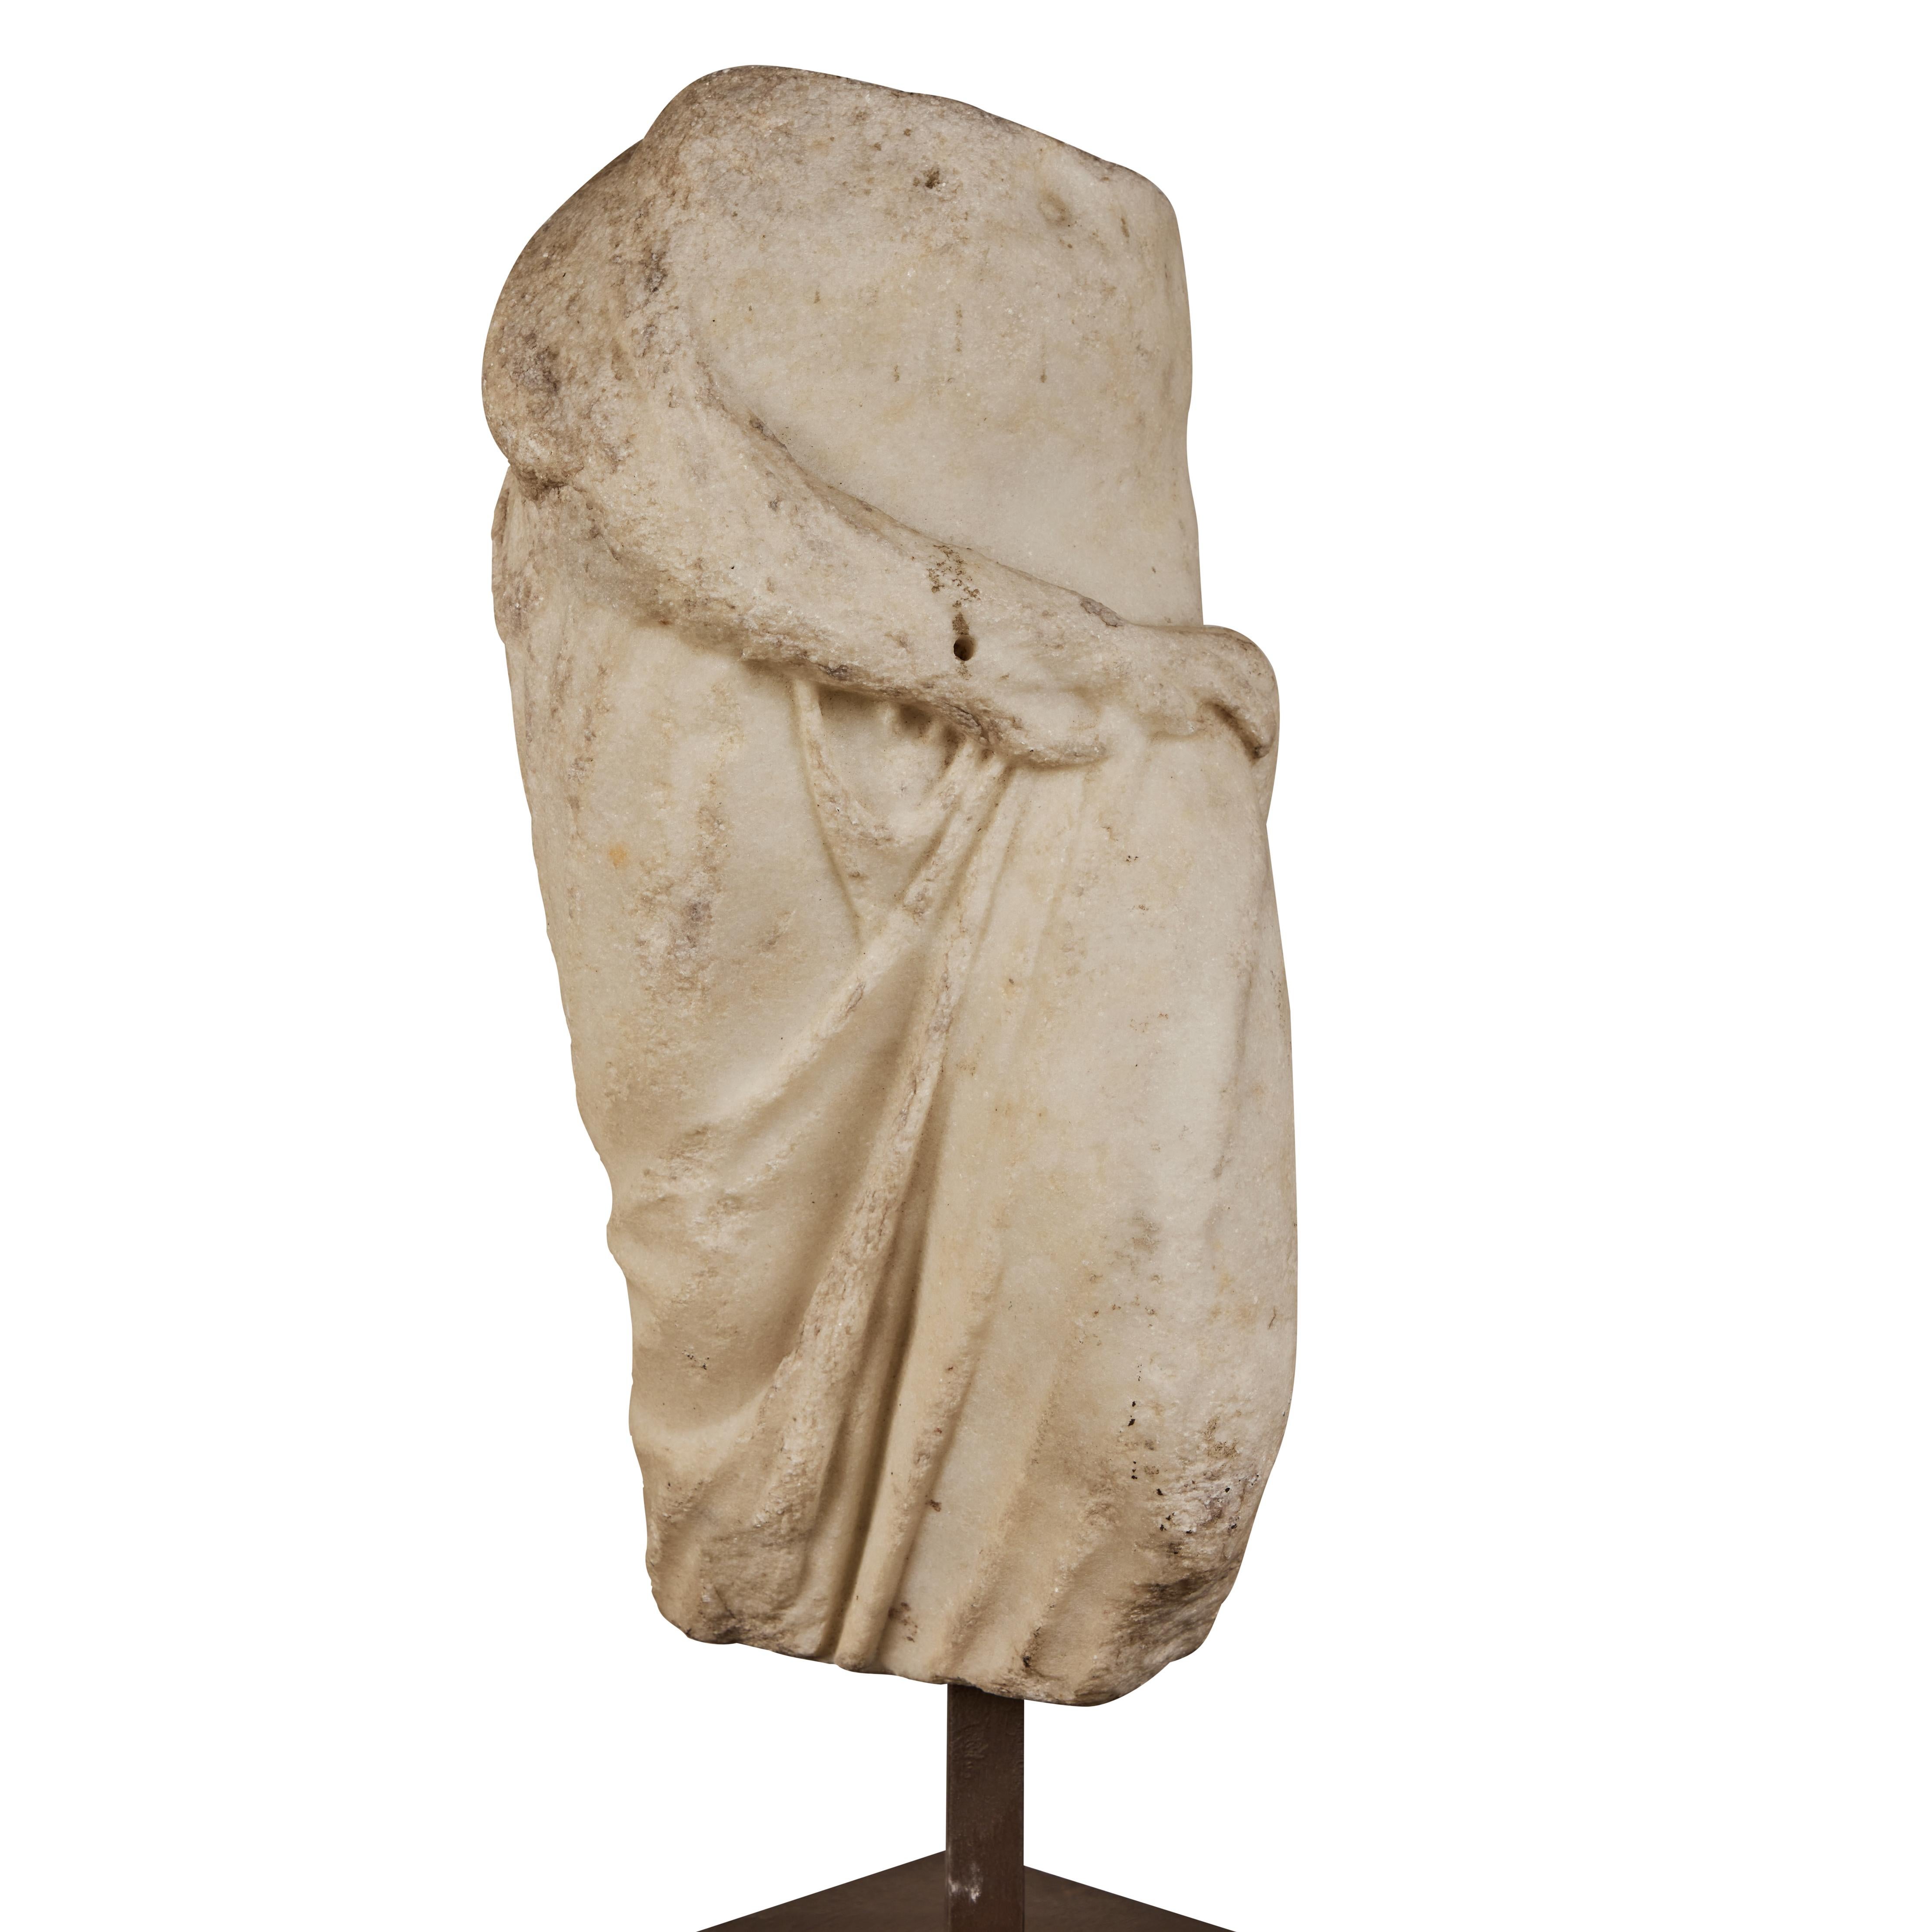 A graceful, Carrara marble fragment of the goddess Aphrodite mounted on a metal base. From the Piedmont Region of Italy. 
Roman Empire, 1st - 2nd century AD

Provenance: 